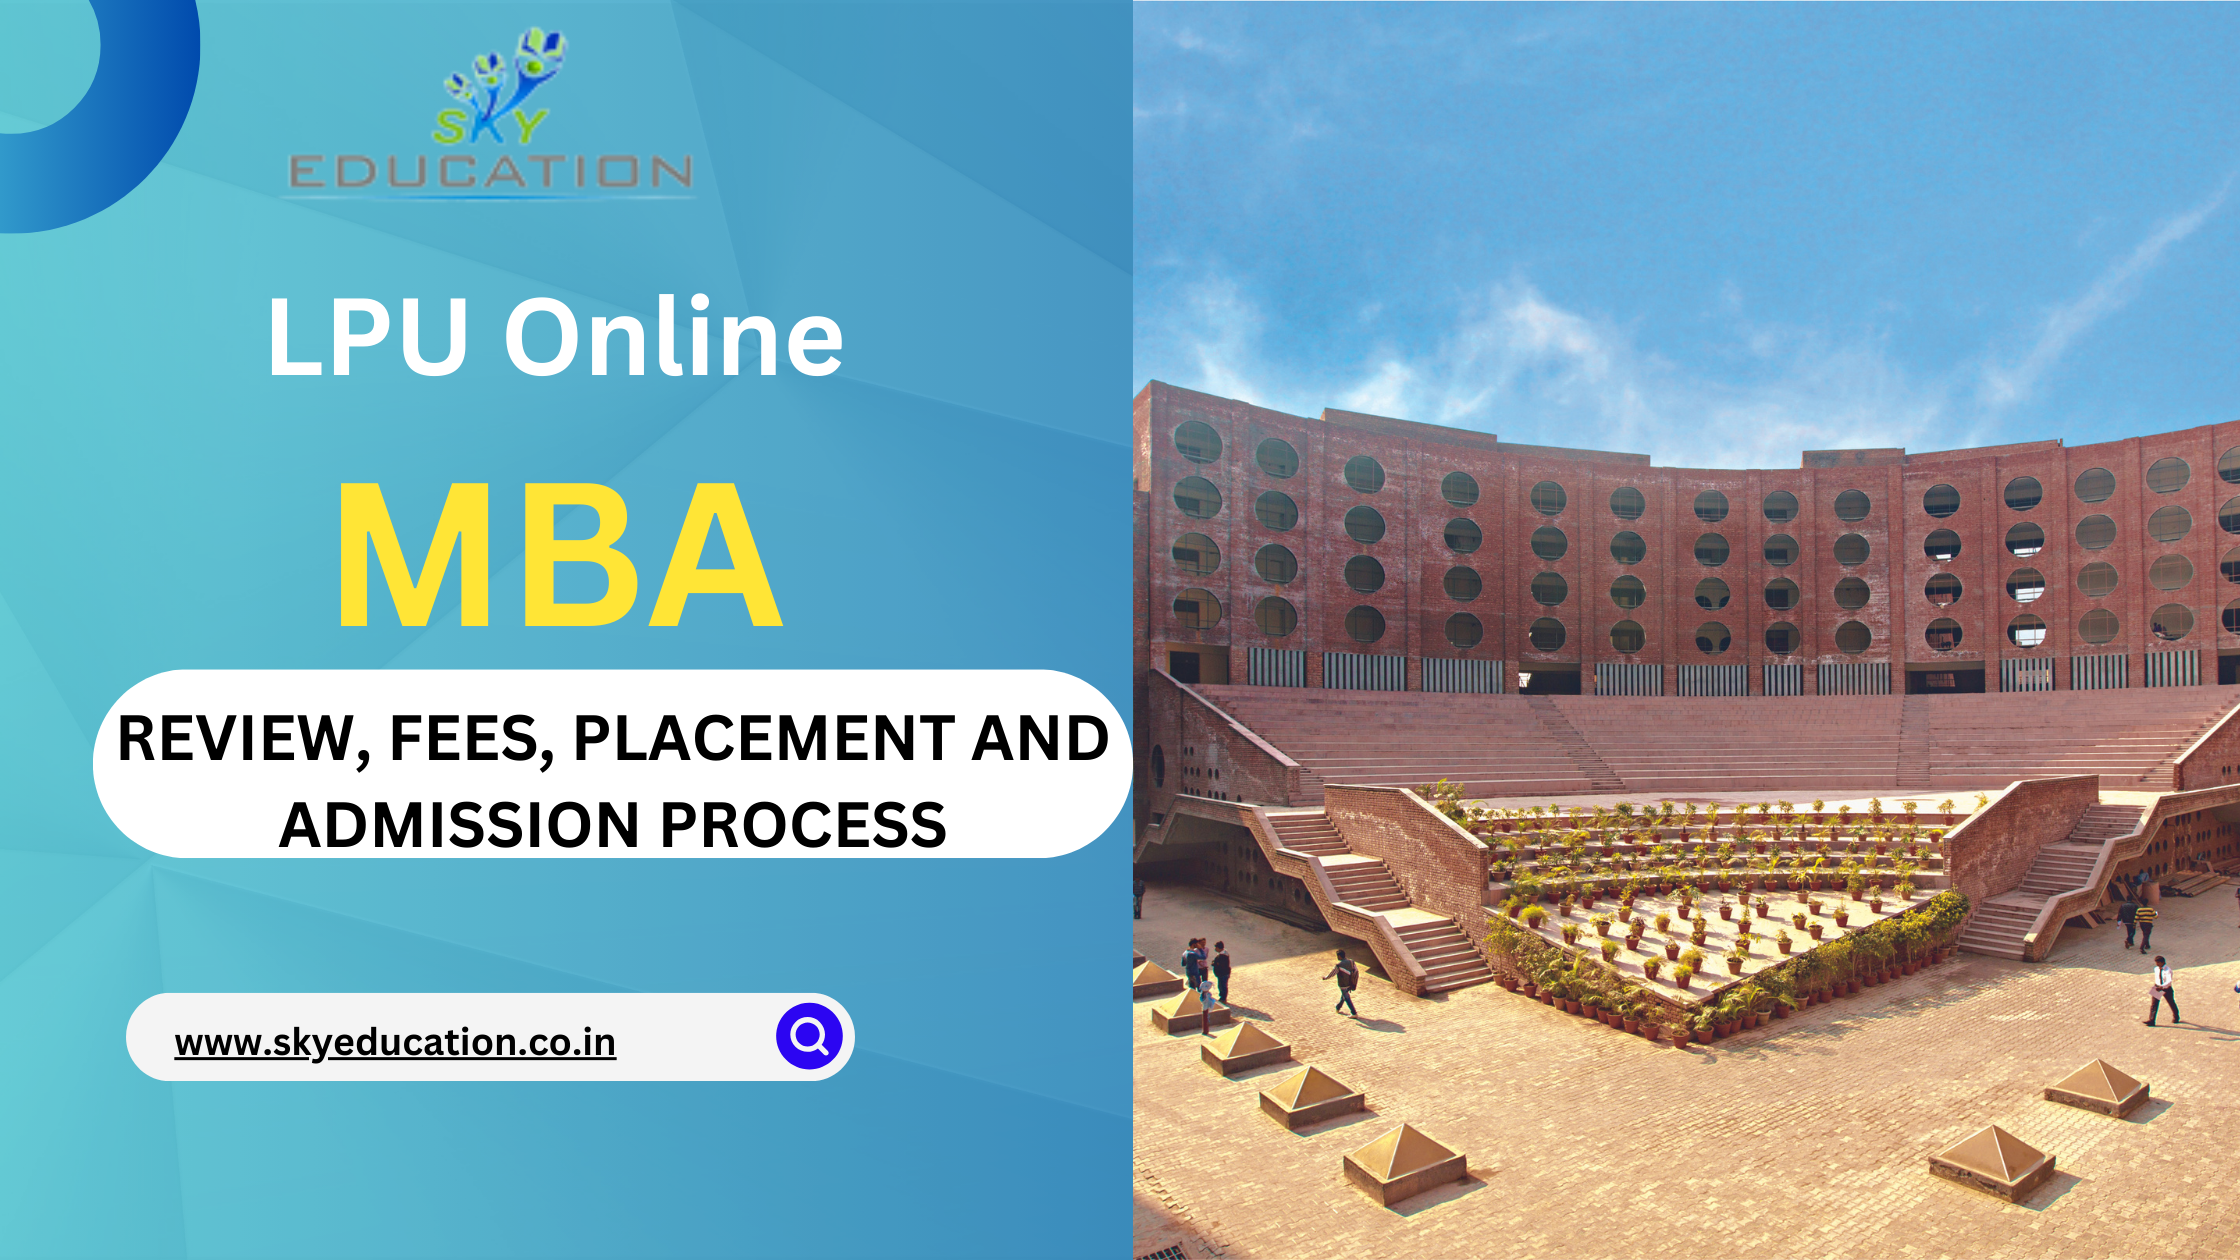 LPU Online MBA Program: Review, Fees, Placement and Admission Process 'photo